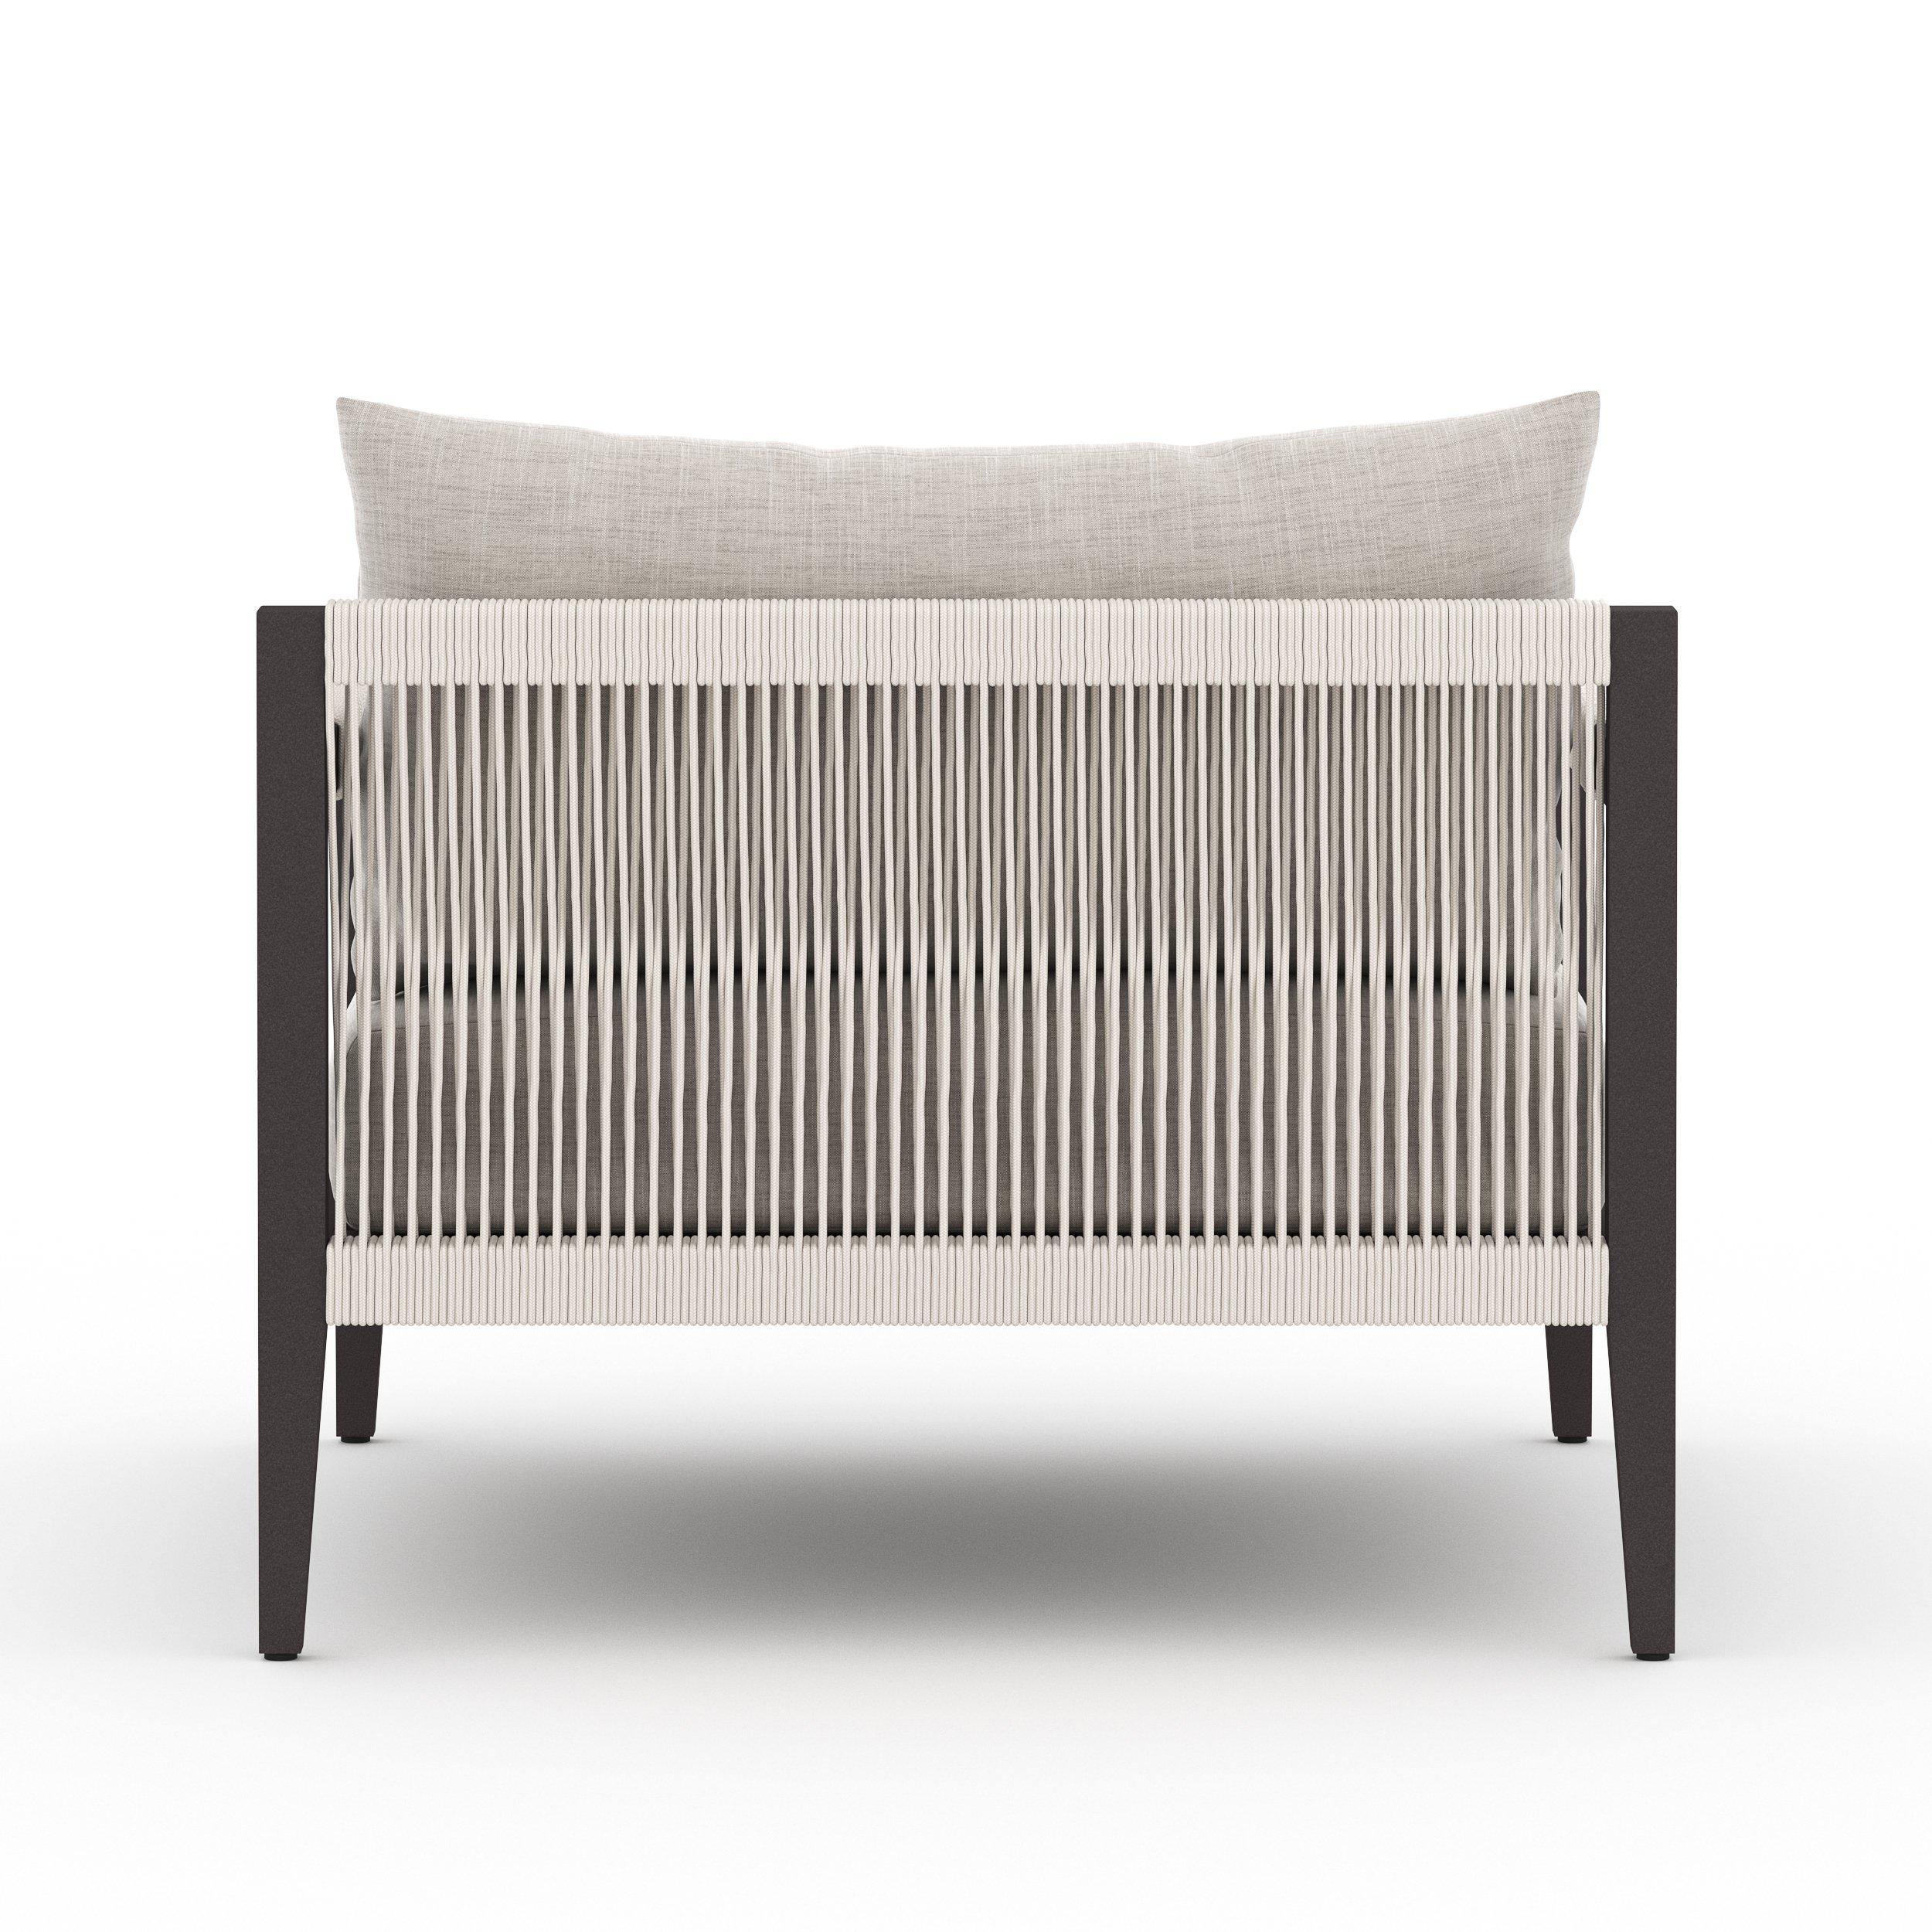 Four Hands FURNITURE - Albers Outdoor Chair - Bronze Frame